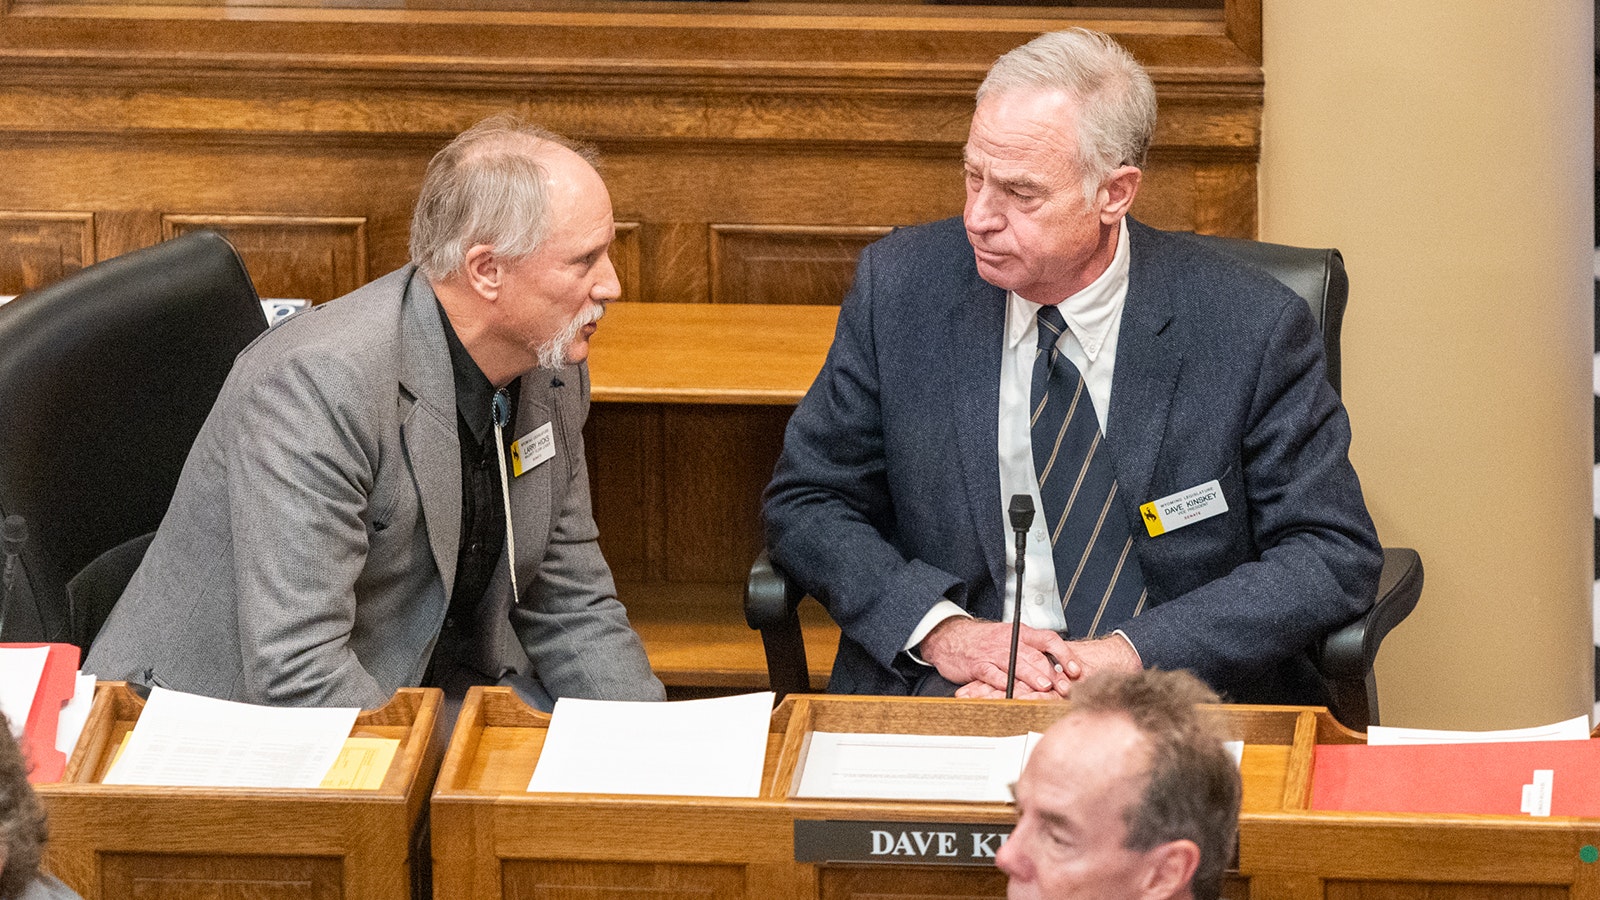 Sens. Larry Hicks and Dave Kinsey talk during the first day of the 2024 legislative session. The first order of business for the Senate was overturning a decision by Senate President Ogden Driskill in the interim to remove Kinskey as chairman of the Appropriations Committee.